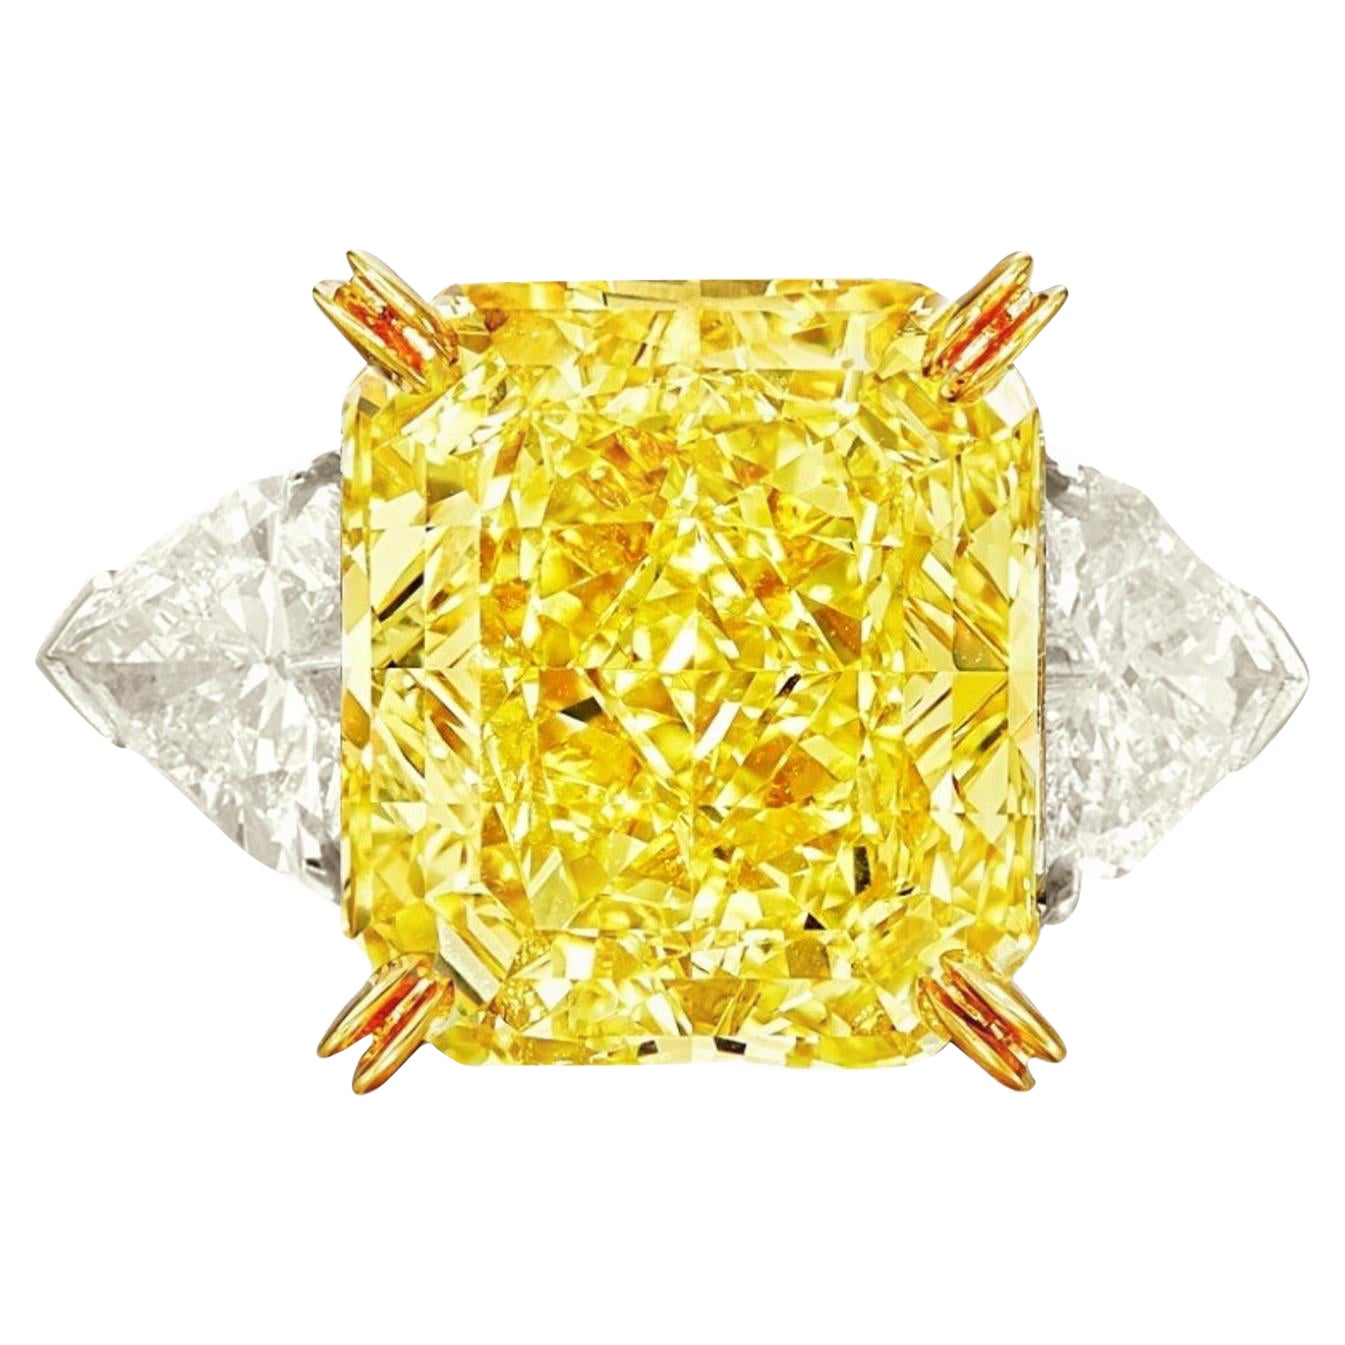 GIA Certified 12 Ct Fancy Yellow Diamond Ring with Trillion